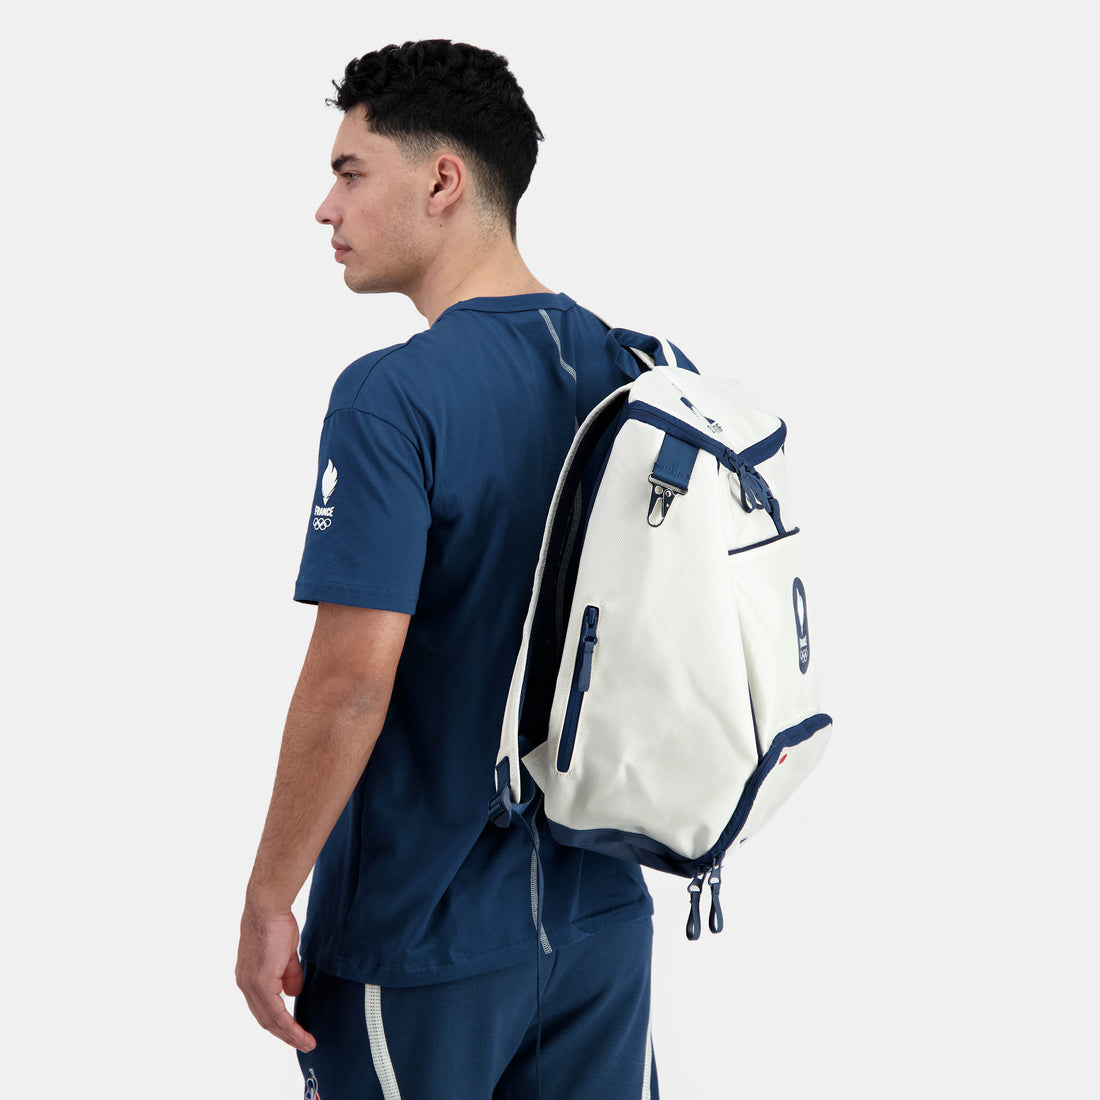 2421234-EFRO 24 Sac à Dos new optical white  | Backpack Unisex